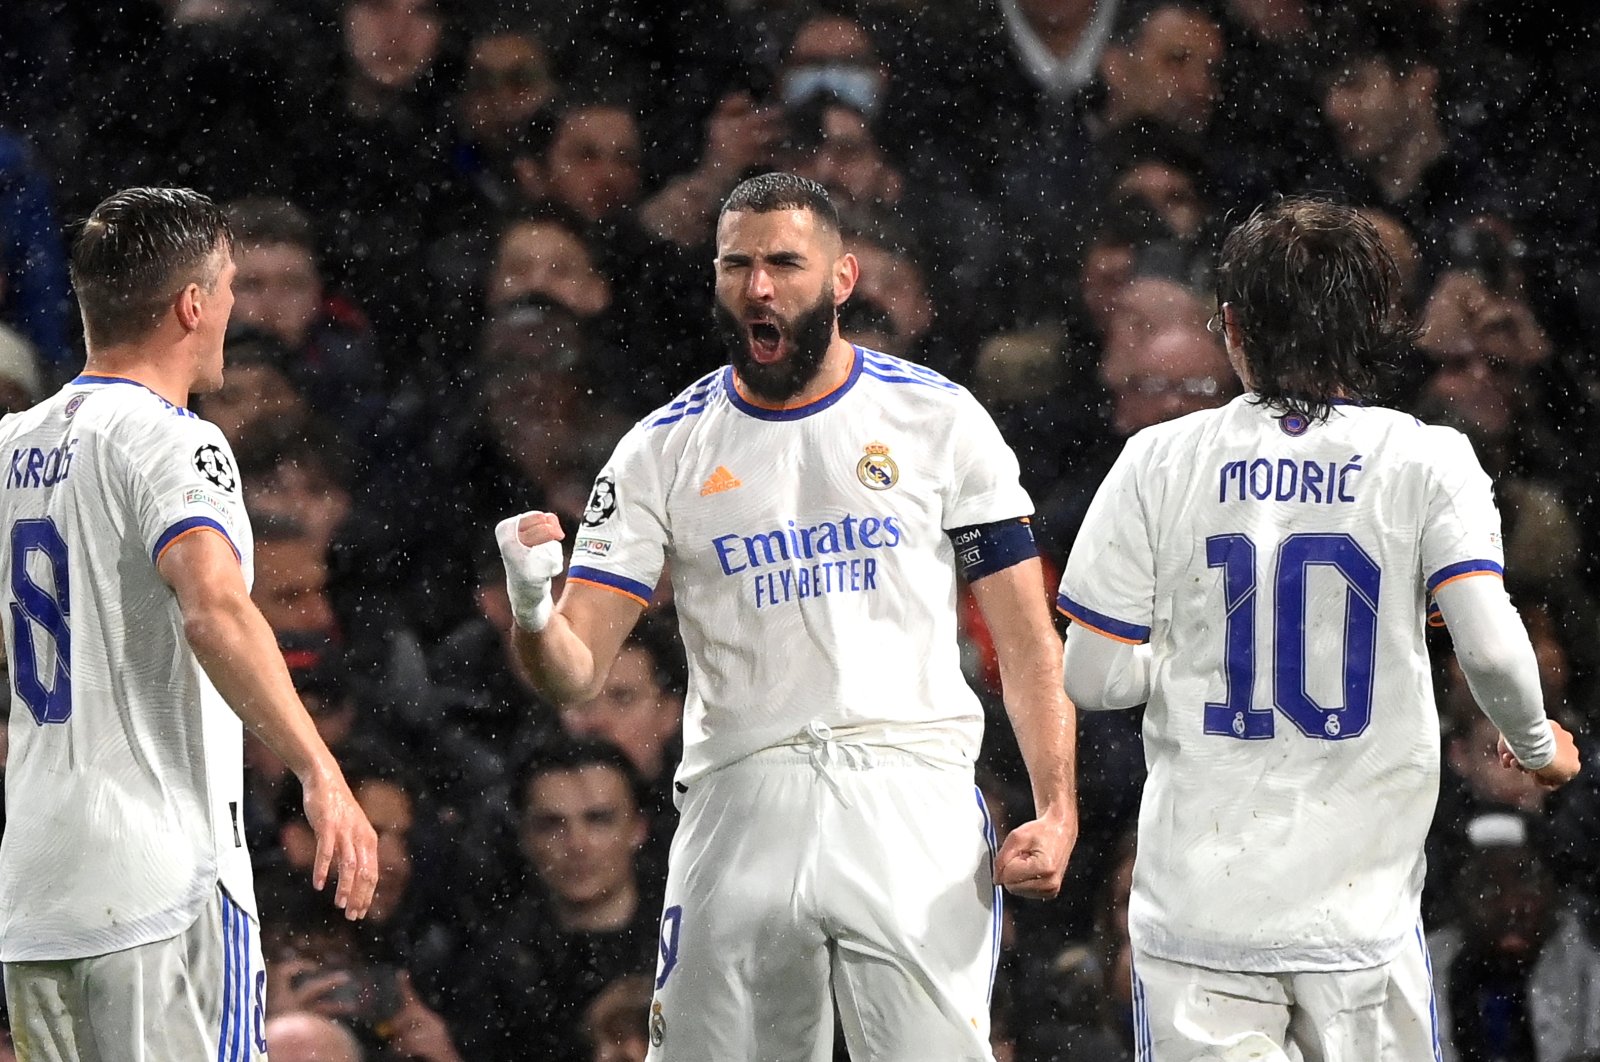 Real Madrid&#039;s Karim Benzema (C) celebrates with teammates after scoring the 1-0 lead during the UEFA Champions League quarterfinal, first leg soccer match between Chelsea FC and Real Madrid in London, Britain, April 6, 2022. (EPA Photo)